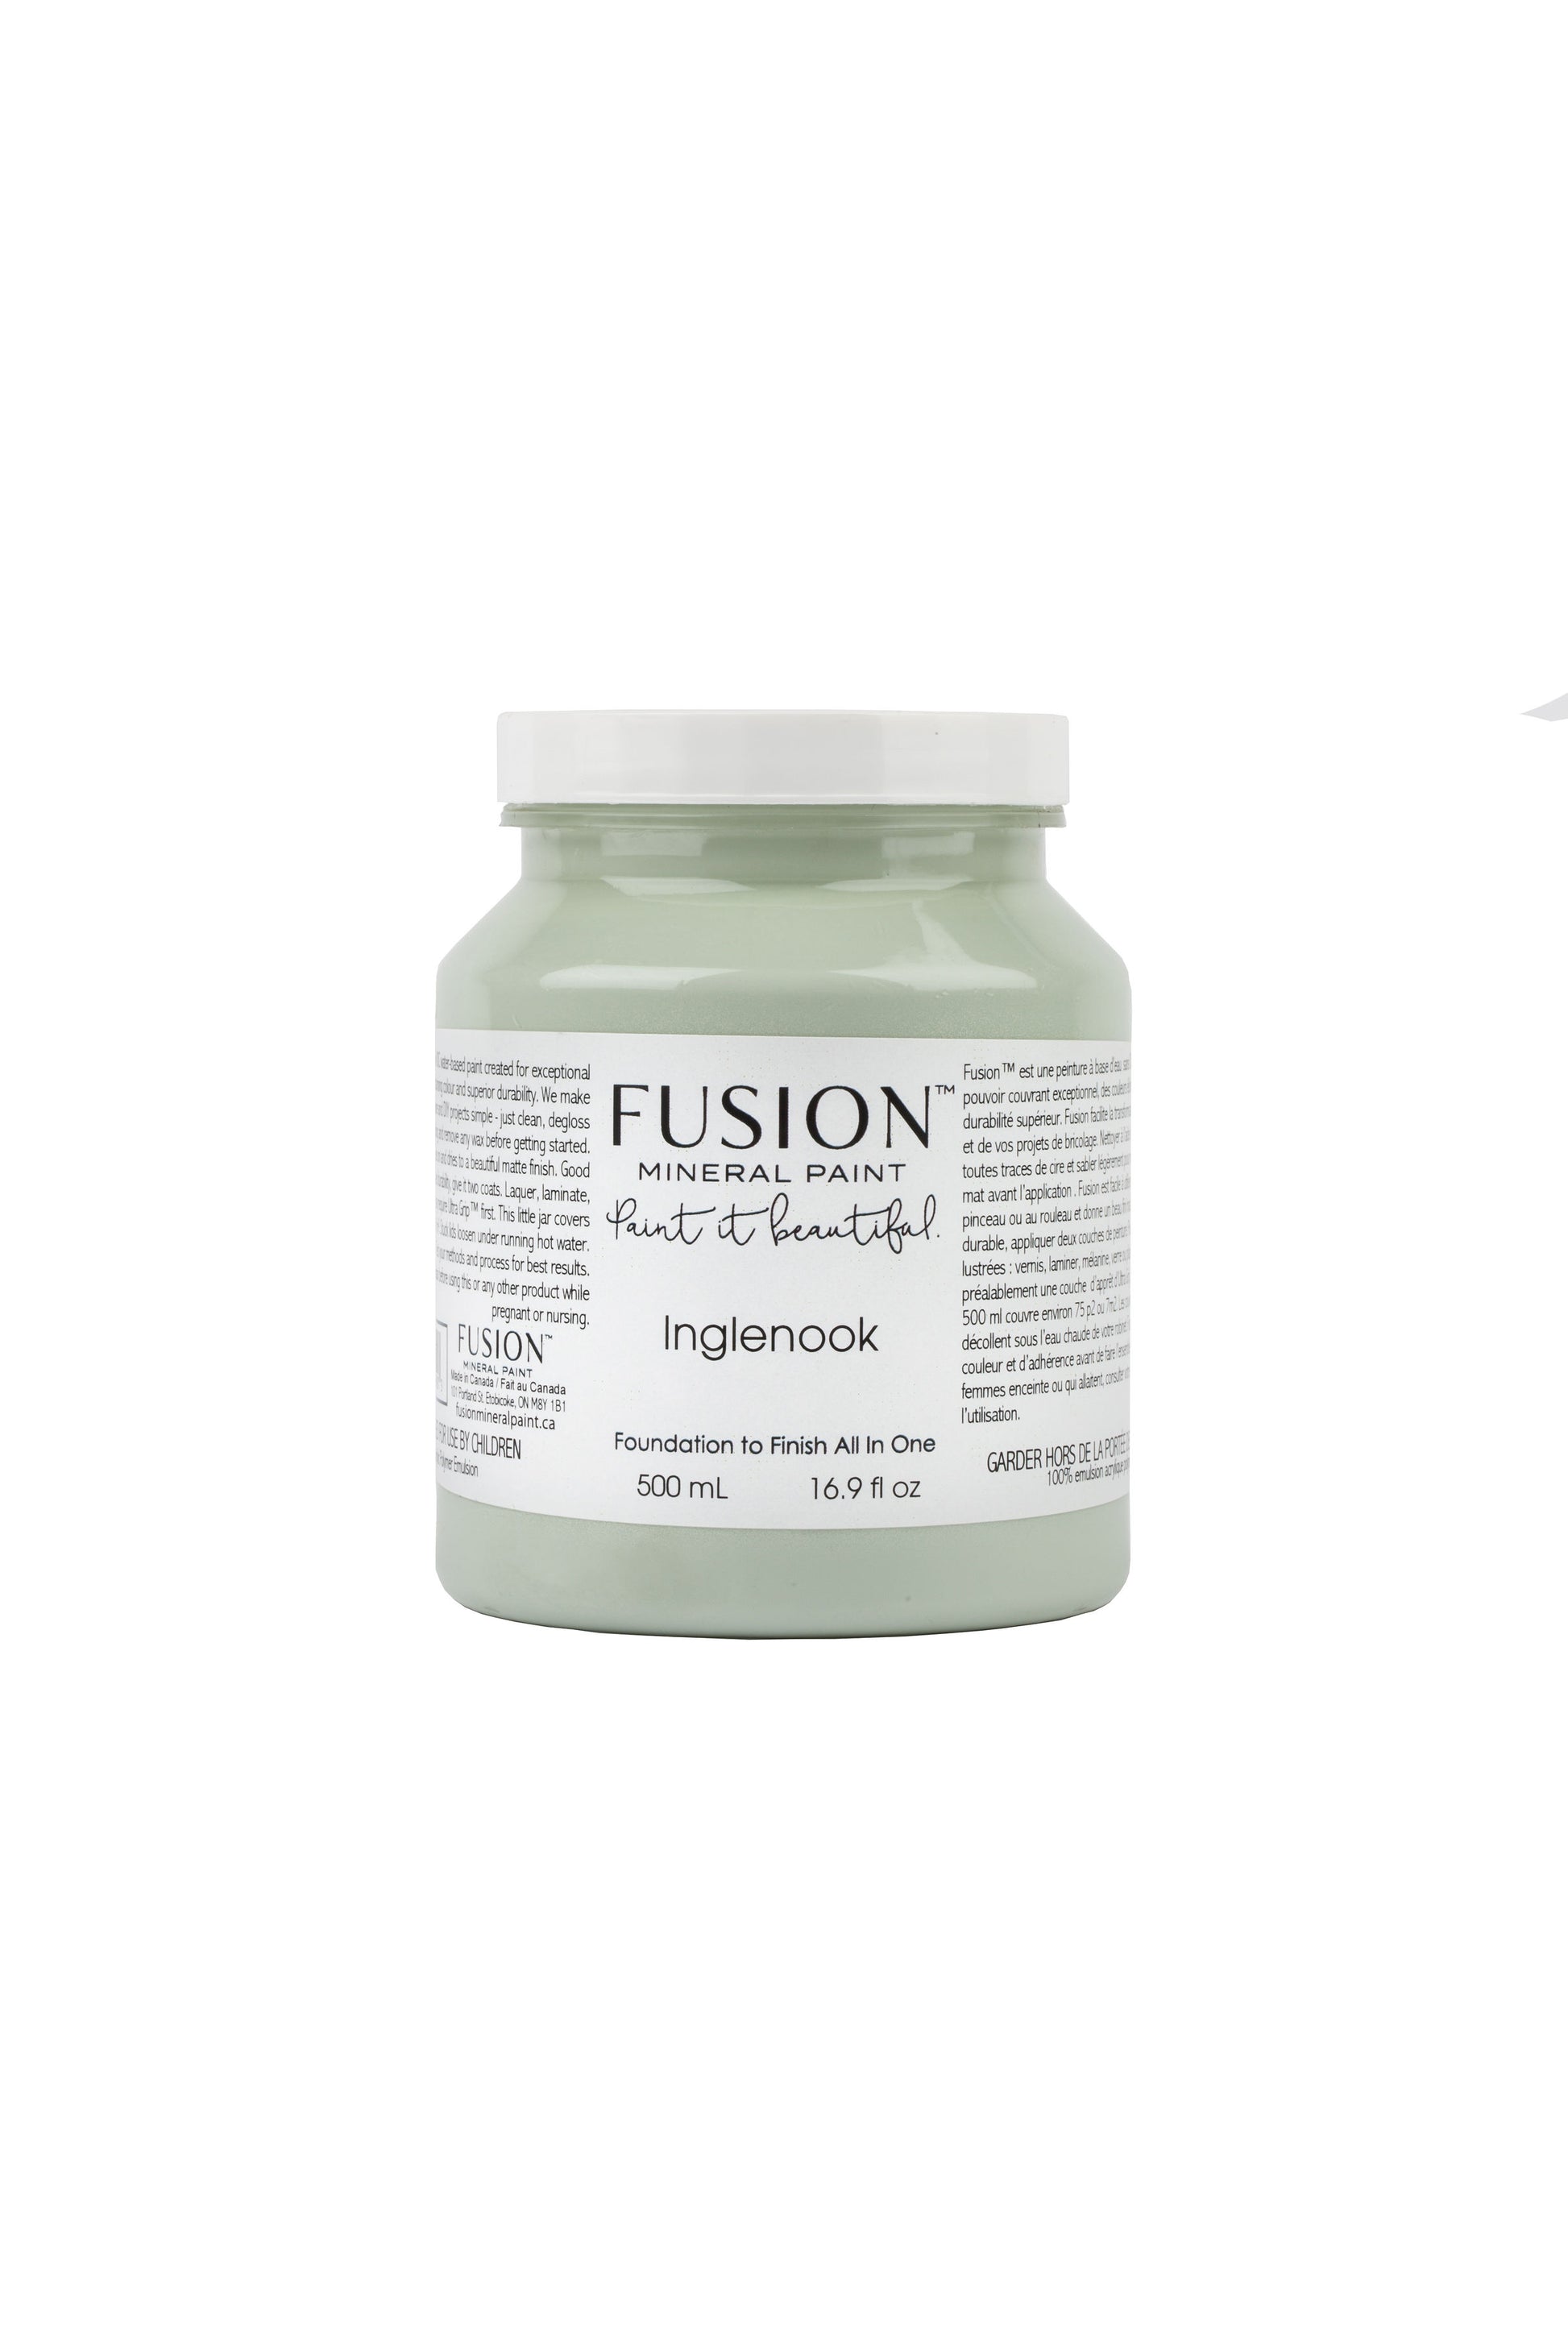 Inglenook Fusion Mineral Paint, Pale Green Paint Color| 500ml Pint Size 